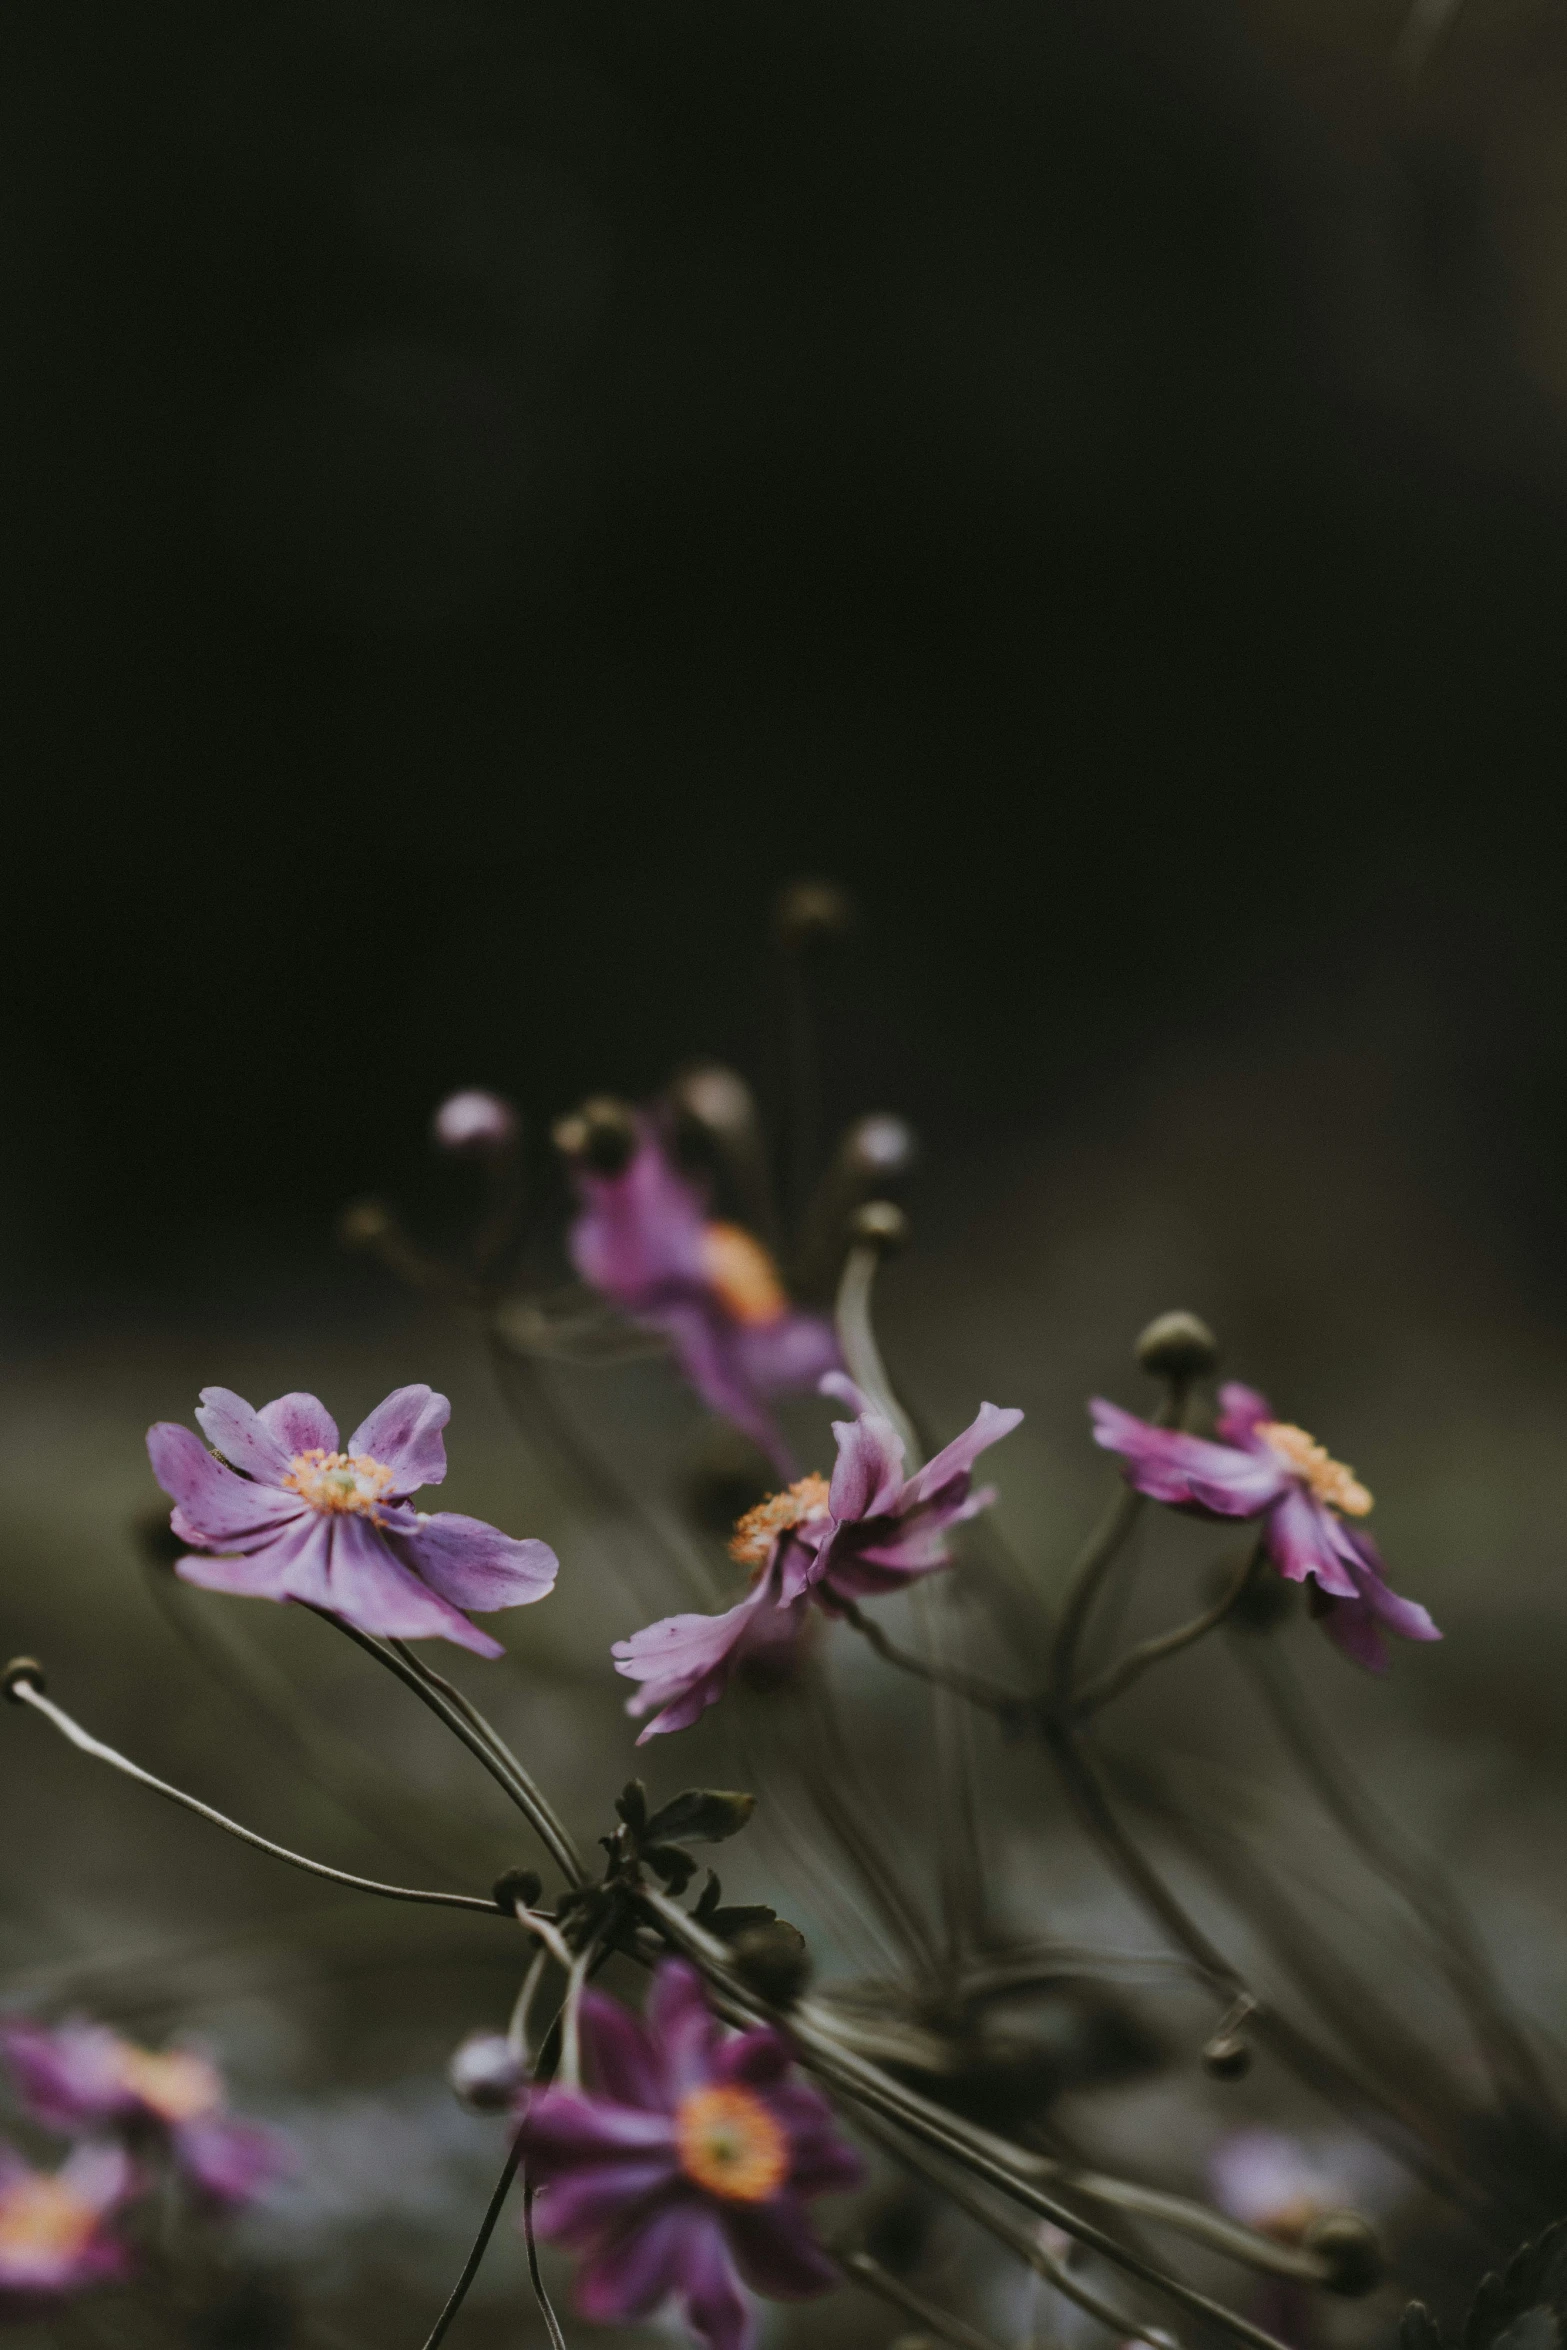 small purple flowers with yellow centers and a dark background